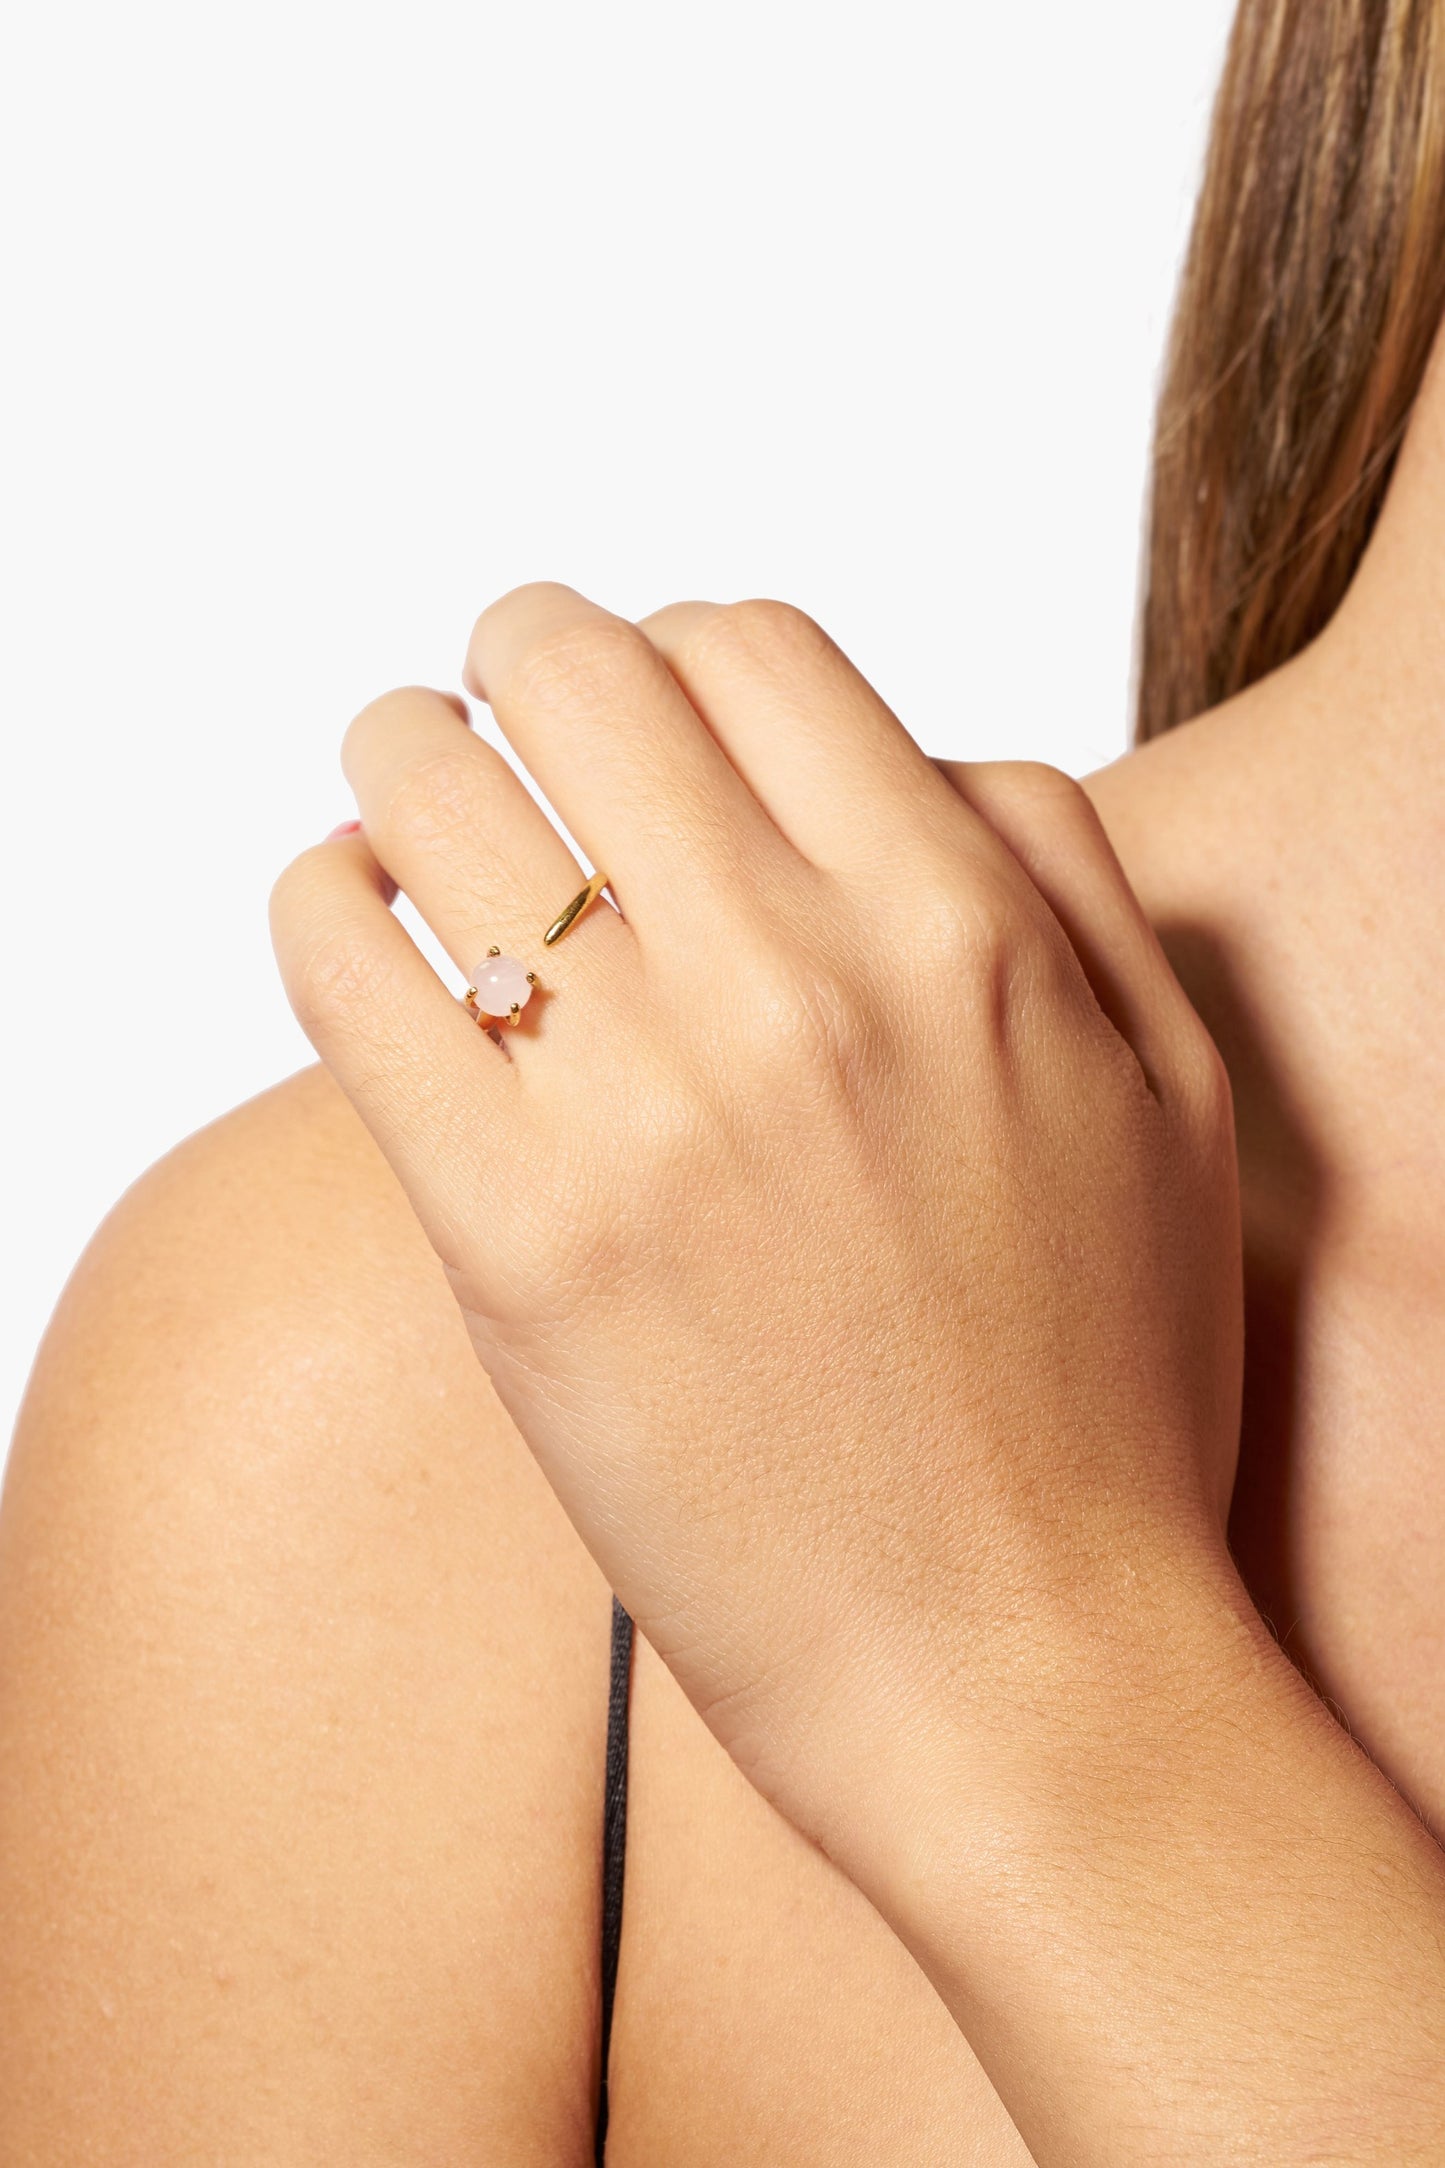 ODETTE_NY_Open_Style_Klint_Gold_Stacking_Ring_with_Rose_Quartz_Stone_Accent_Handmade_in_USA